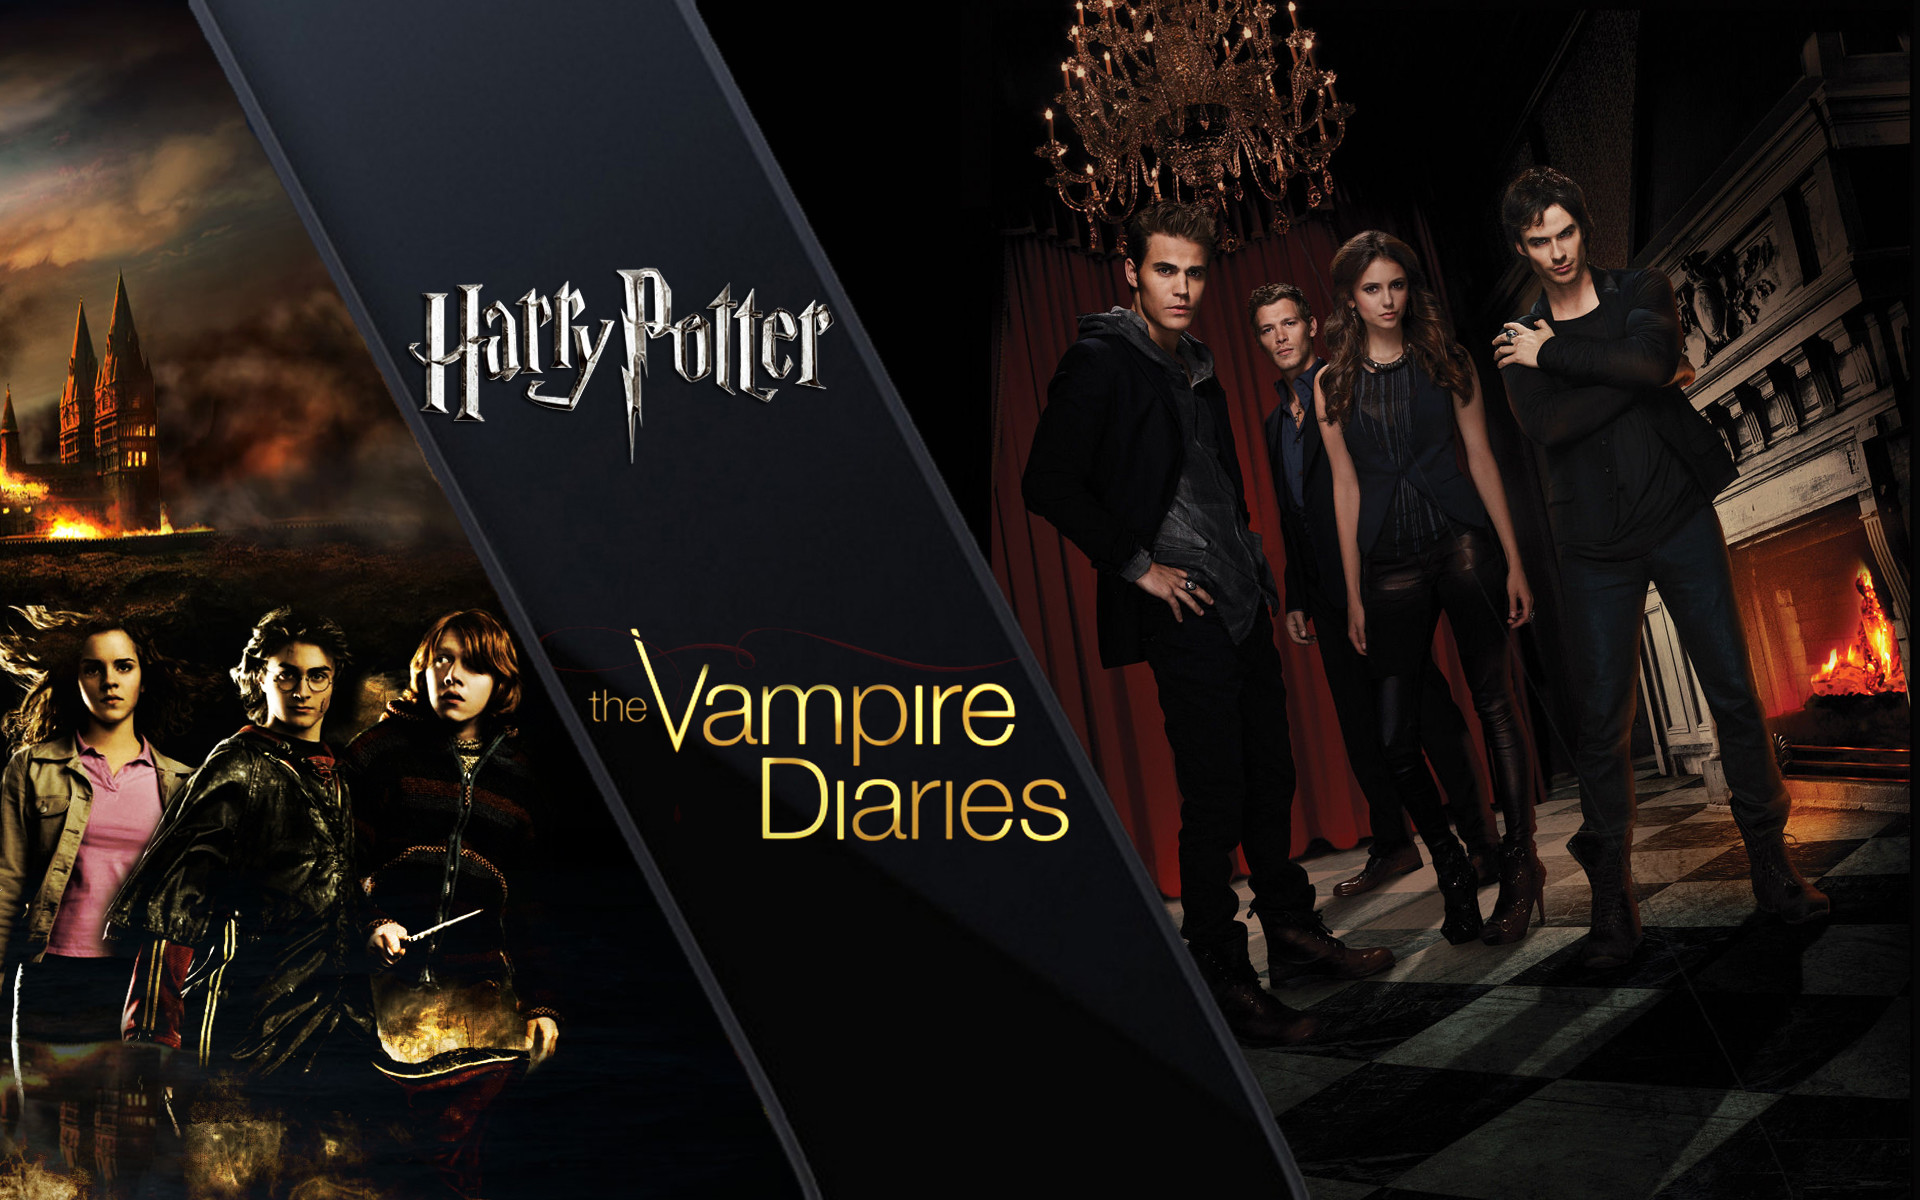 1920x1200 Harry Potter and The Vampire Diaries images HP and TVD Wallpaper HD  wallpaper and background photos